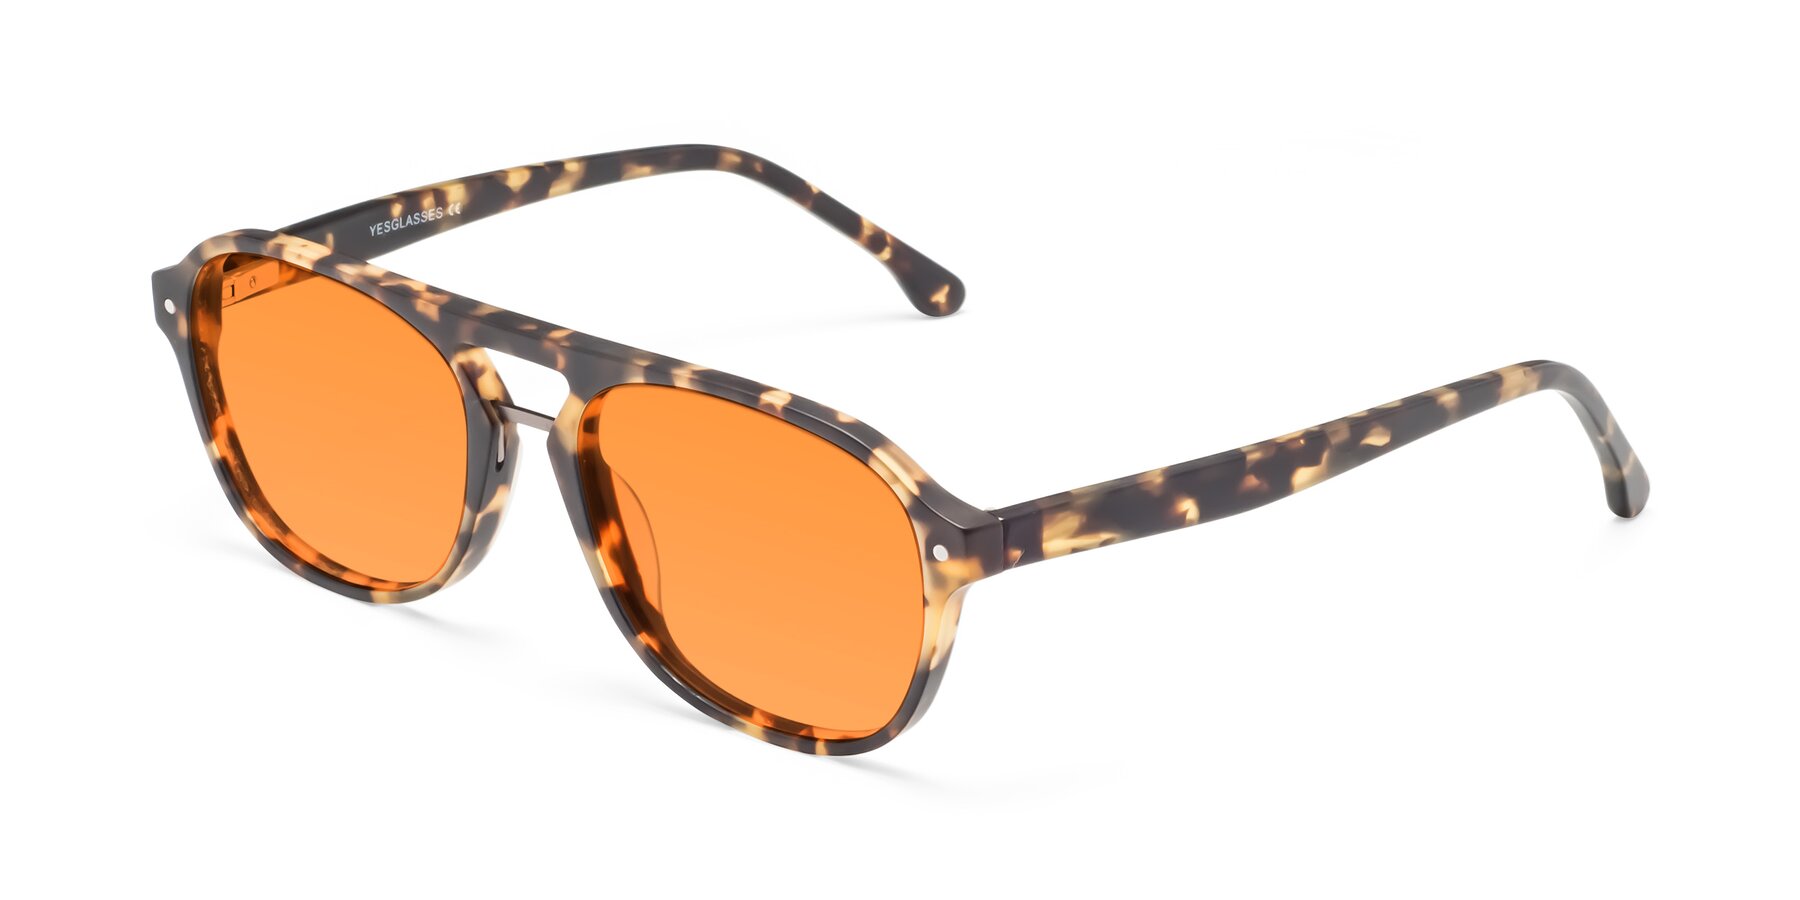 Angle of 17416 in Matte Tortoise with Orange Tinted Lenses